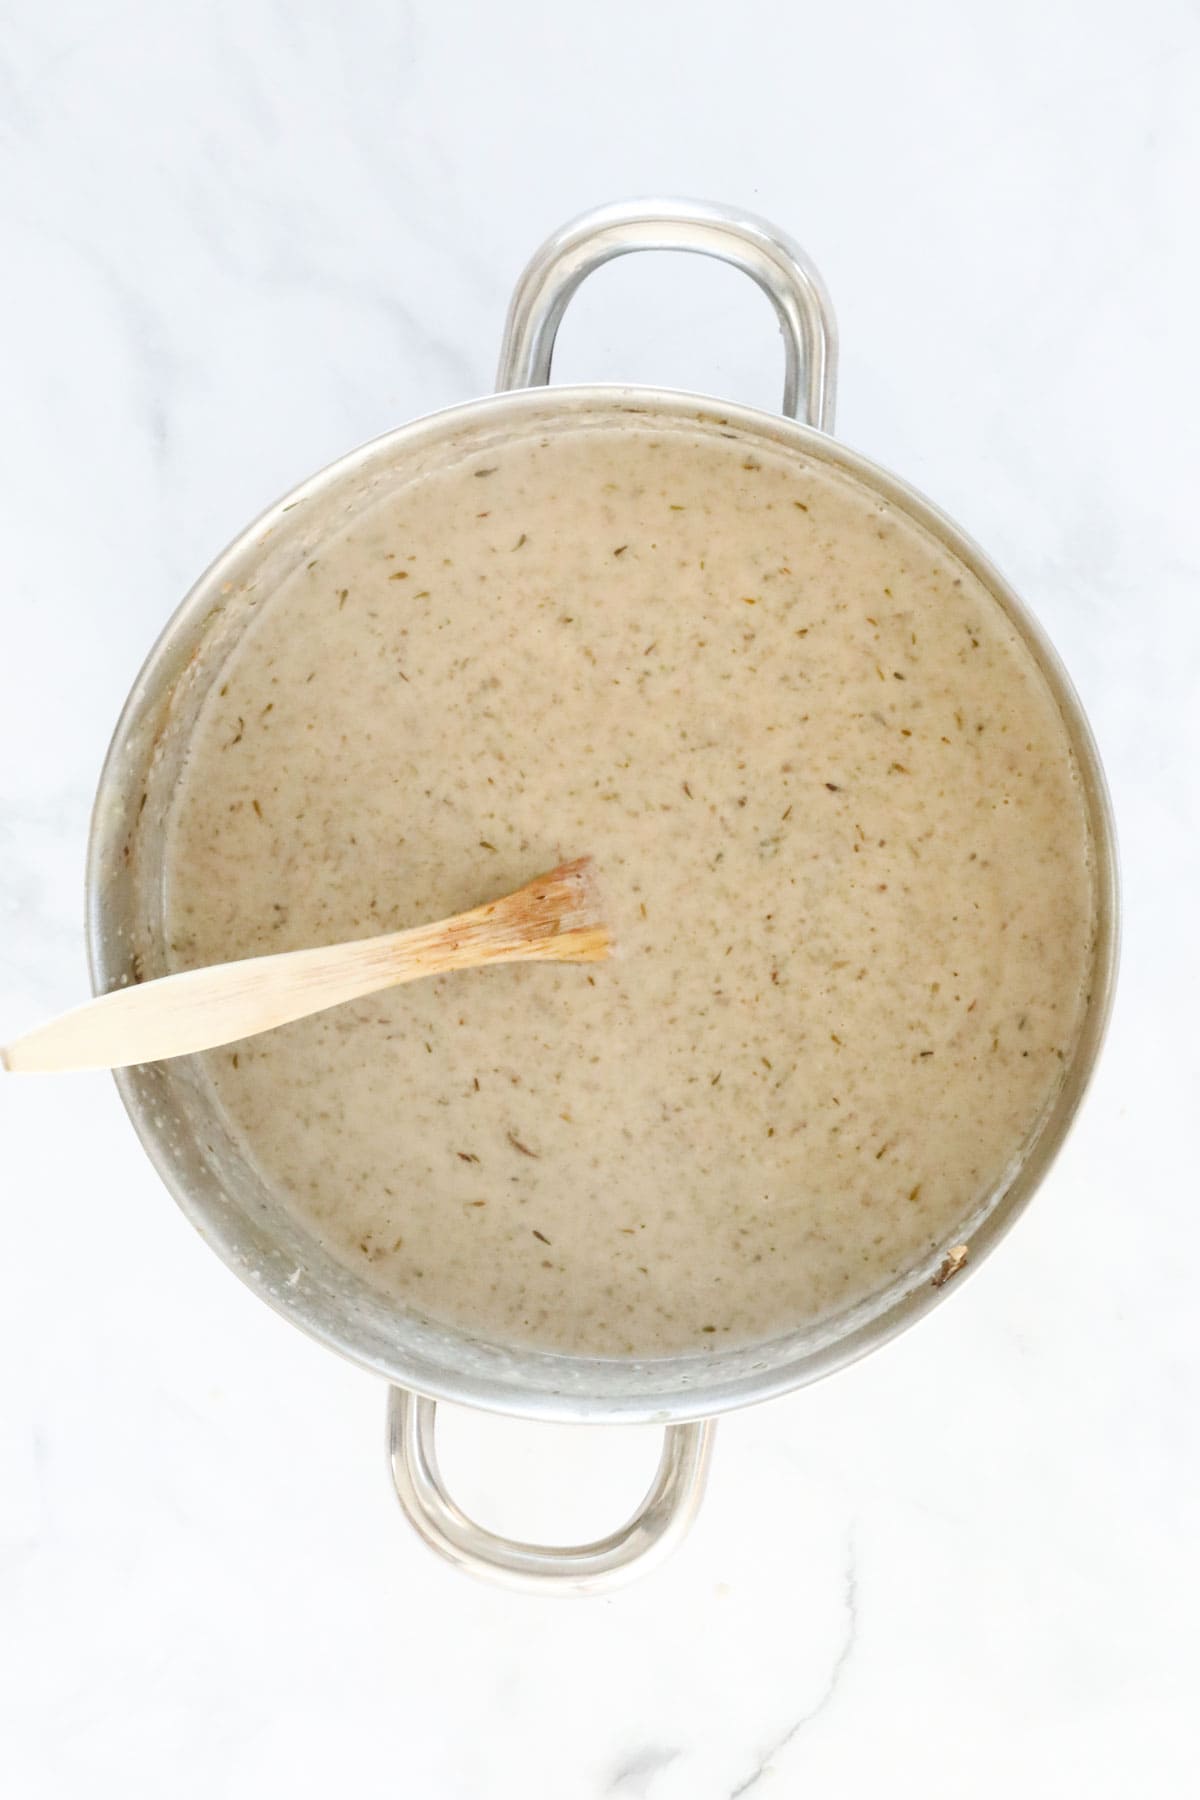 The blended soup in the pan.